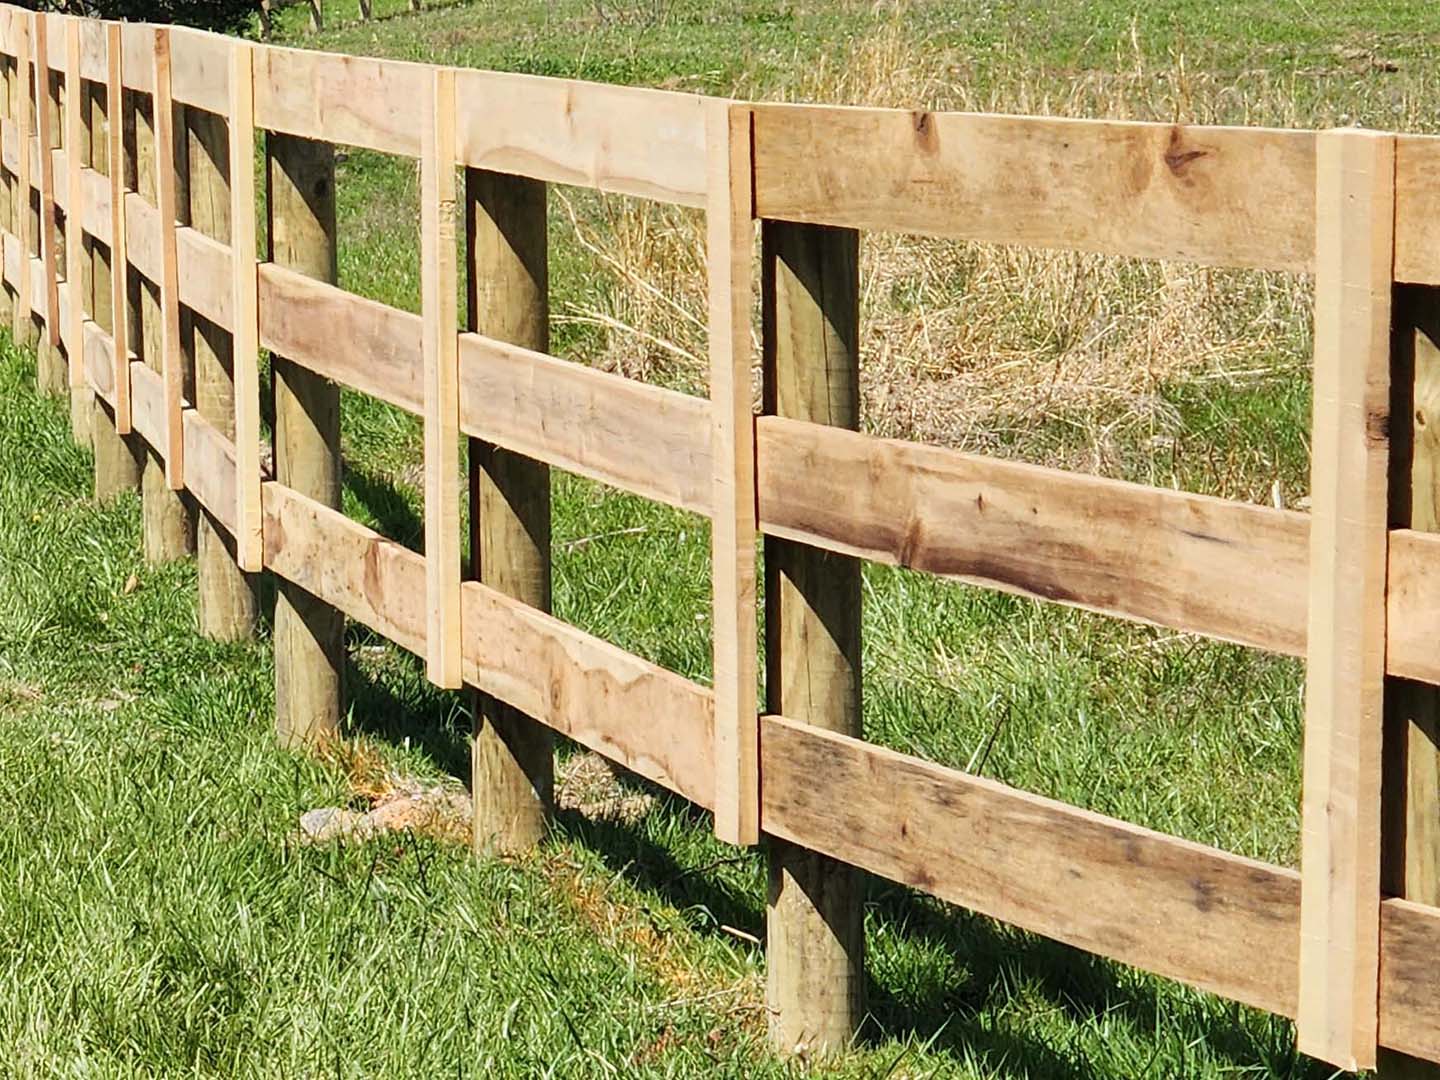 Bedford Indiana residential and agricultural fencing